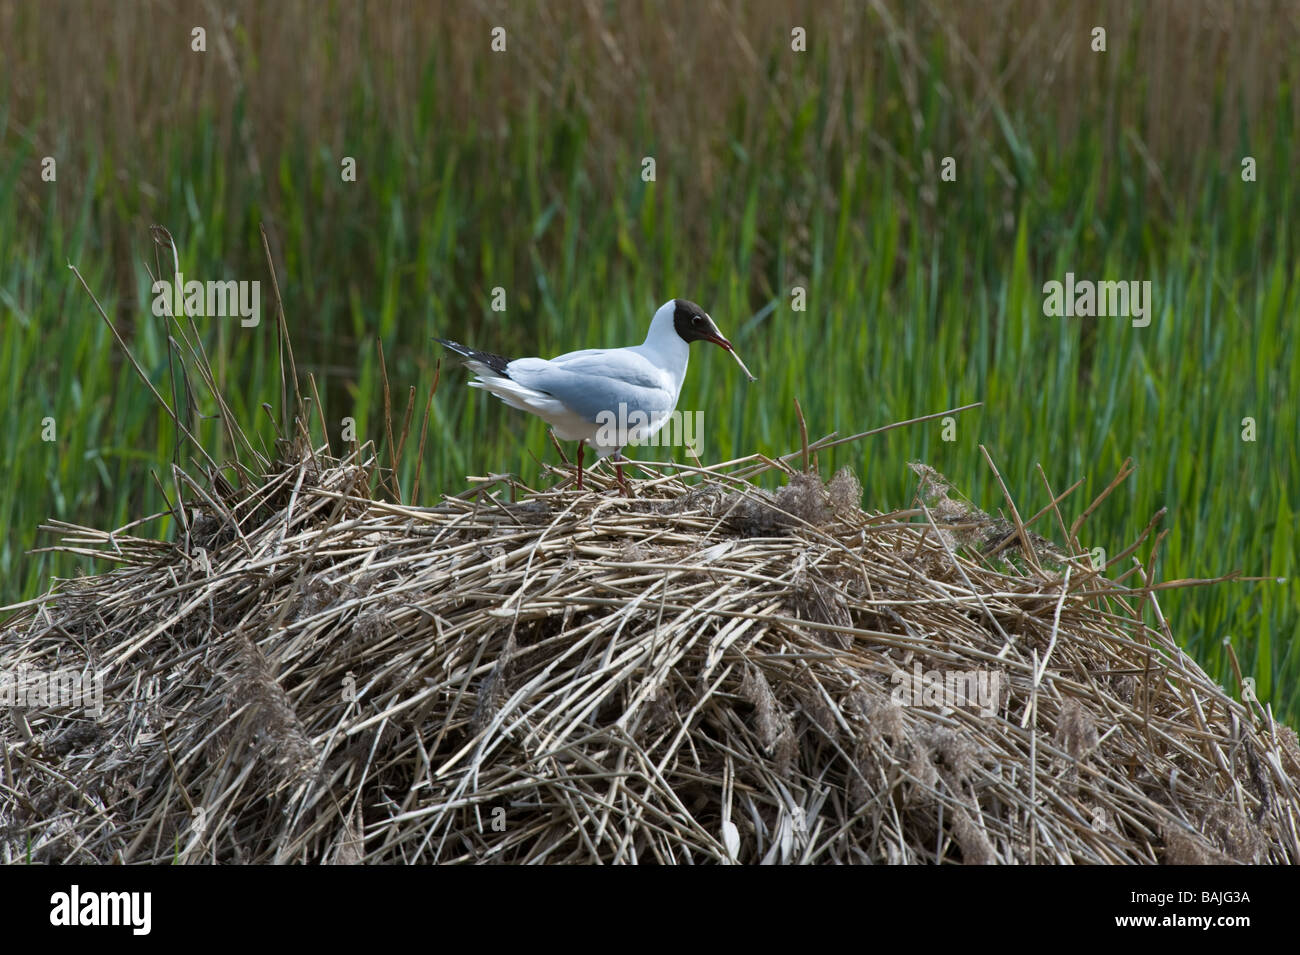 Black headed gull (Larus ridibundus) with nesting material Potteric Carr Nature Reserve  Doncaster South Yorkshire England Stock Photo